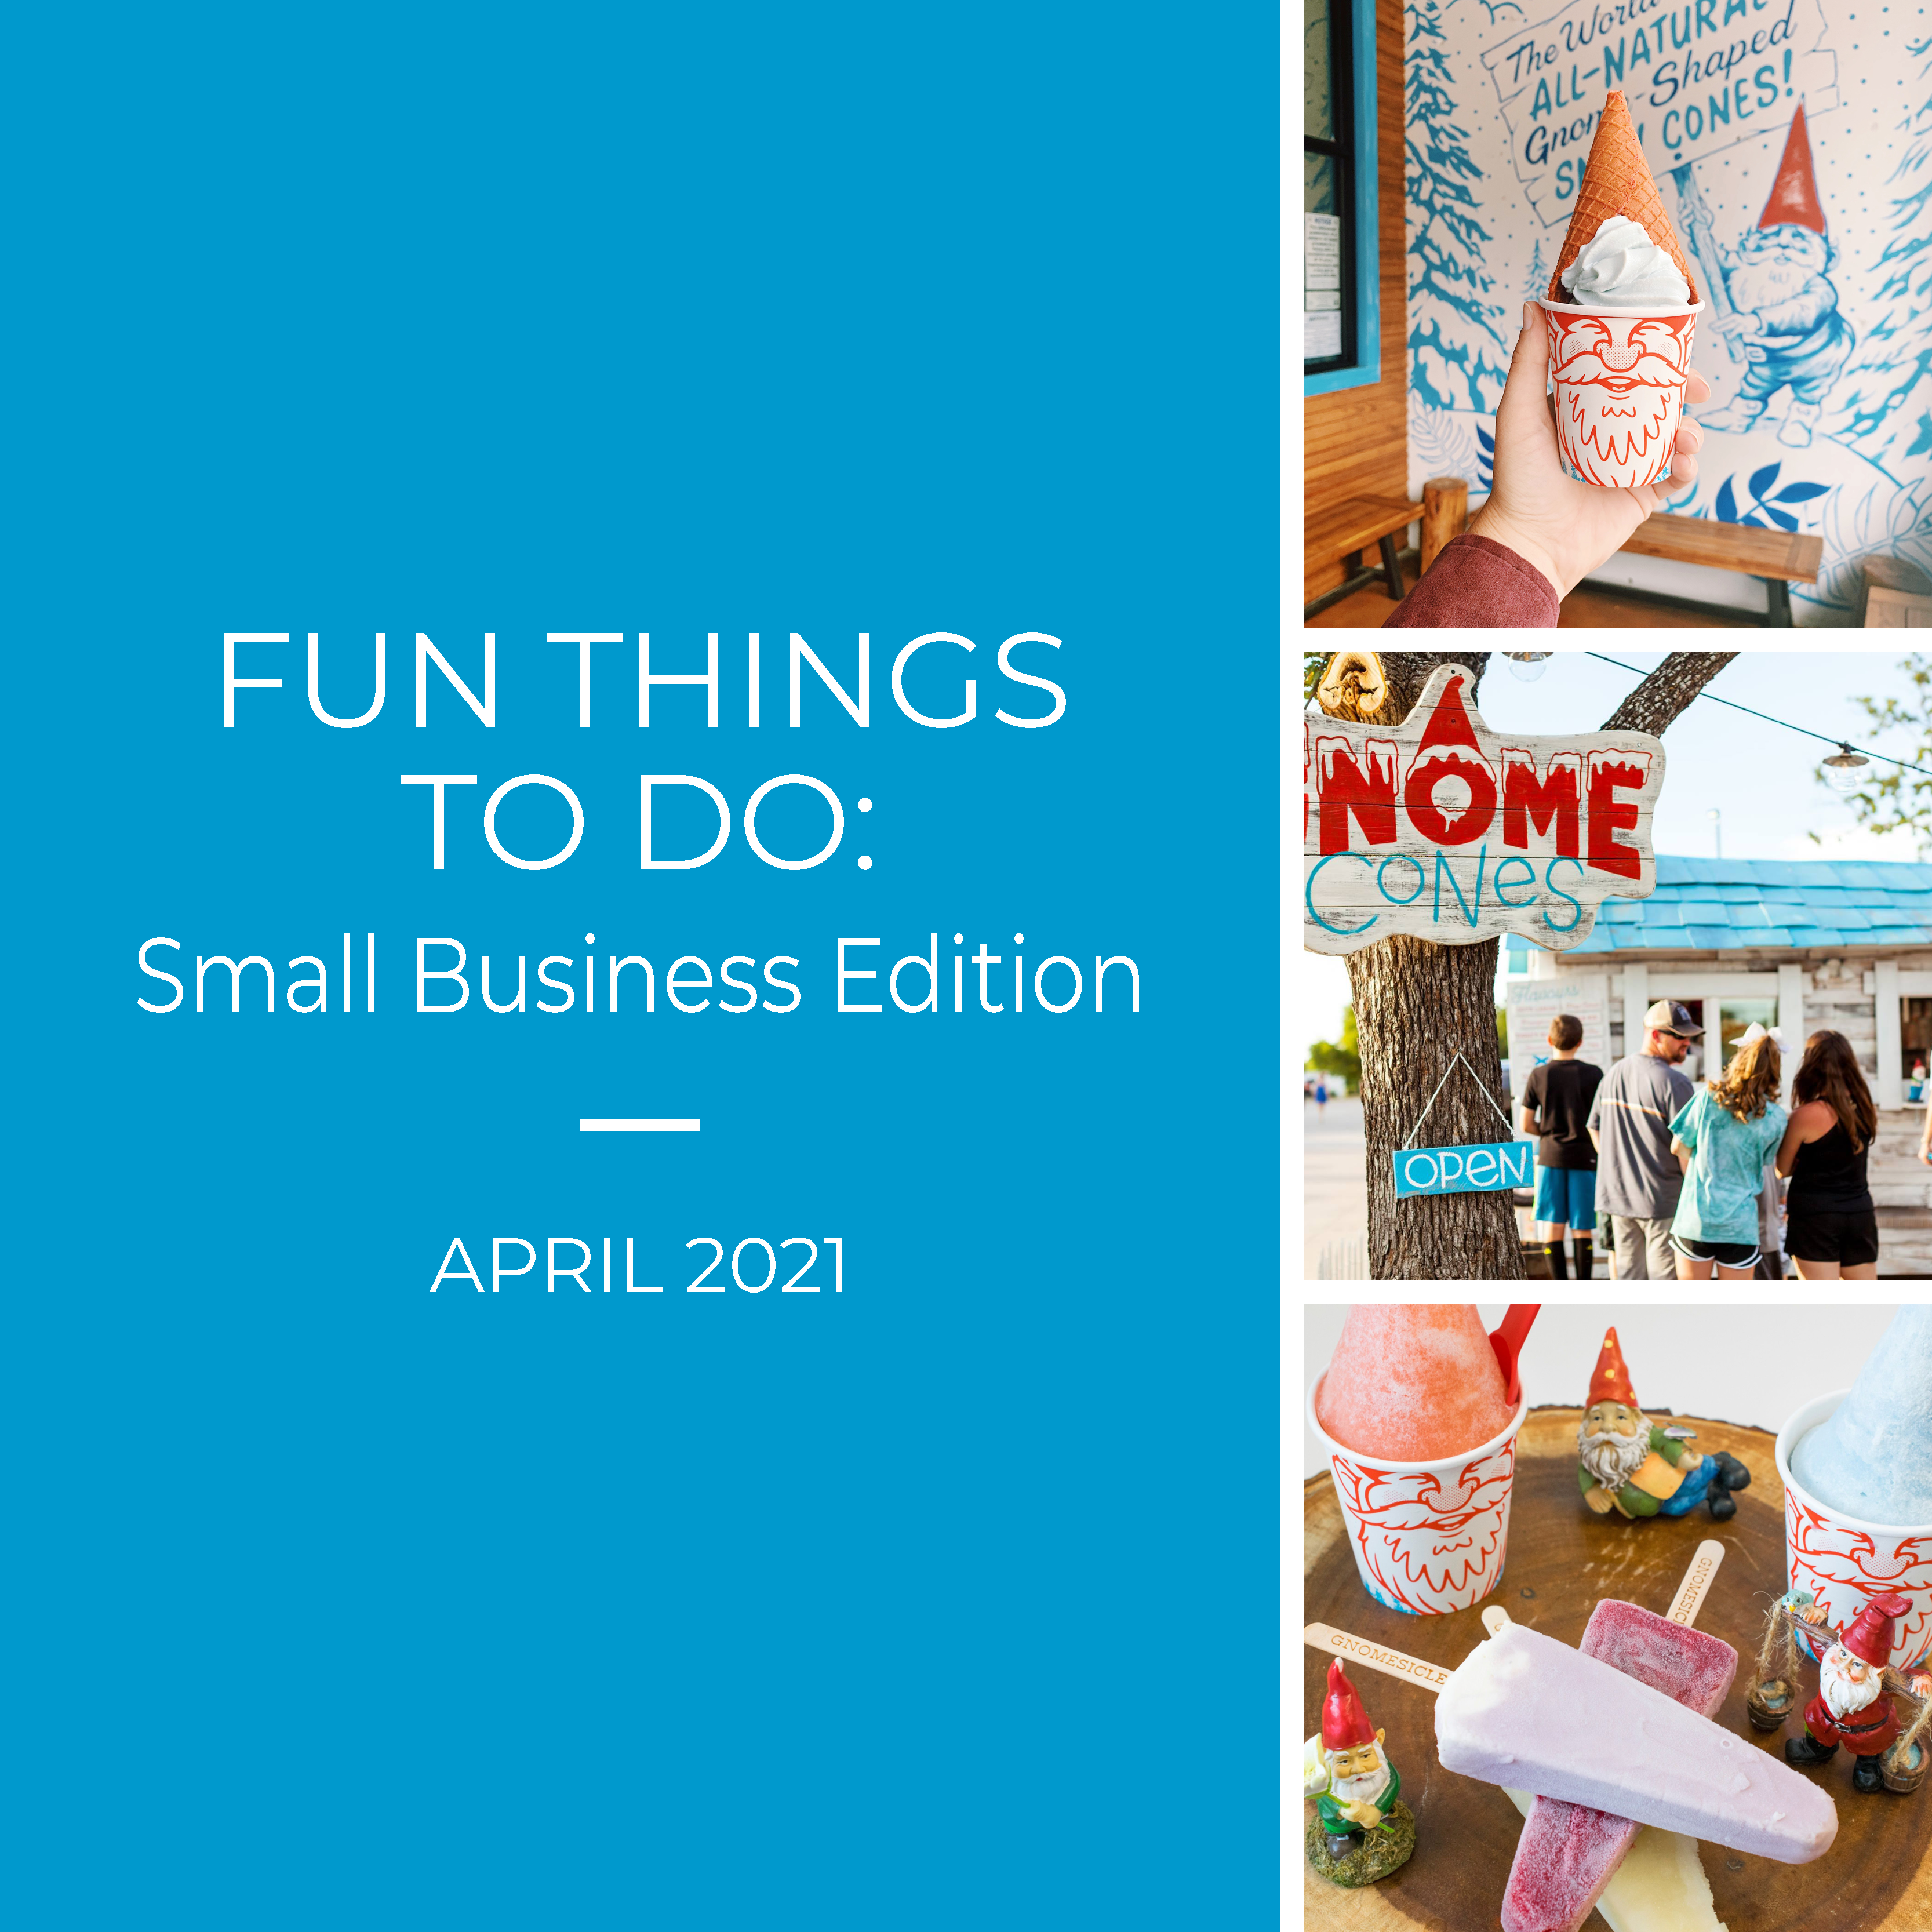 Fun Things to Do in April: Small Business Edition